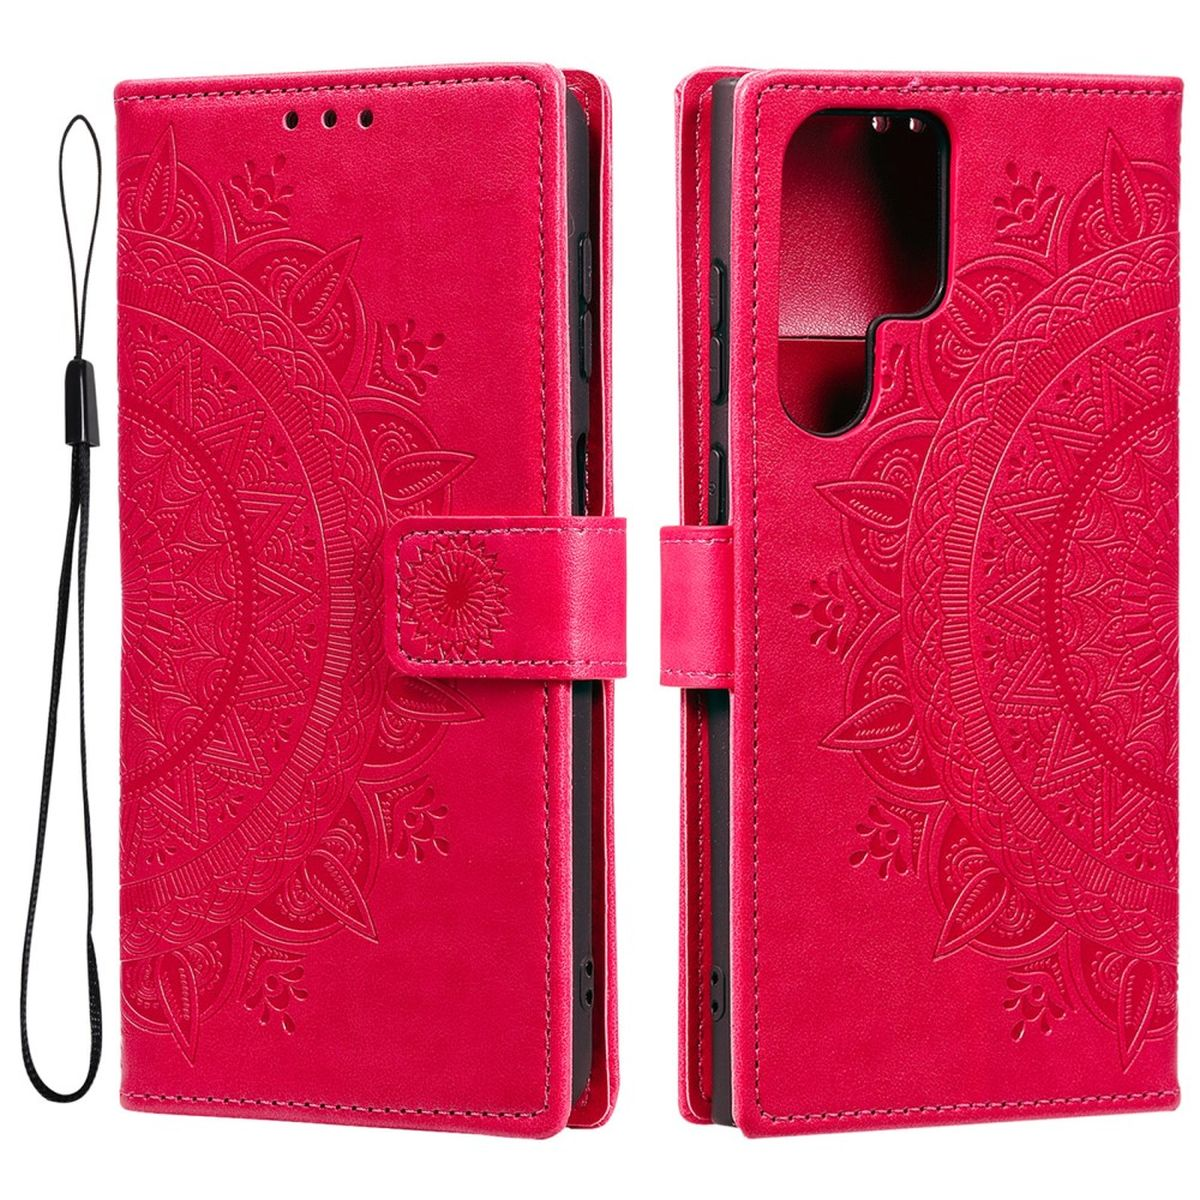 COVERKINGZ Klapphülle Ultra, S22 mit Mandala Pink Muster, Galaxy Samsung, Bookcover